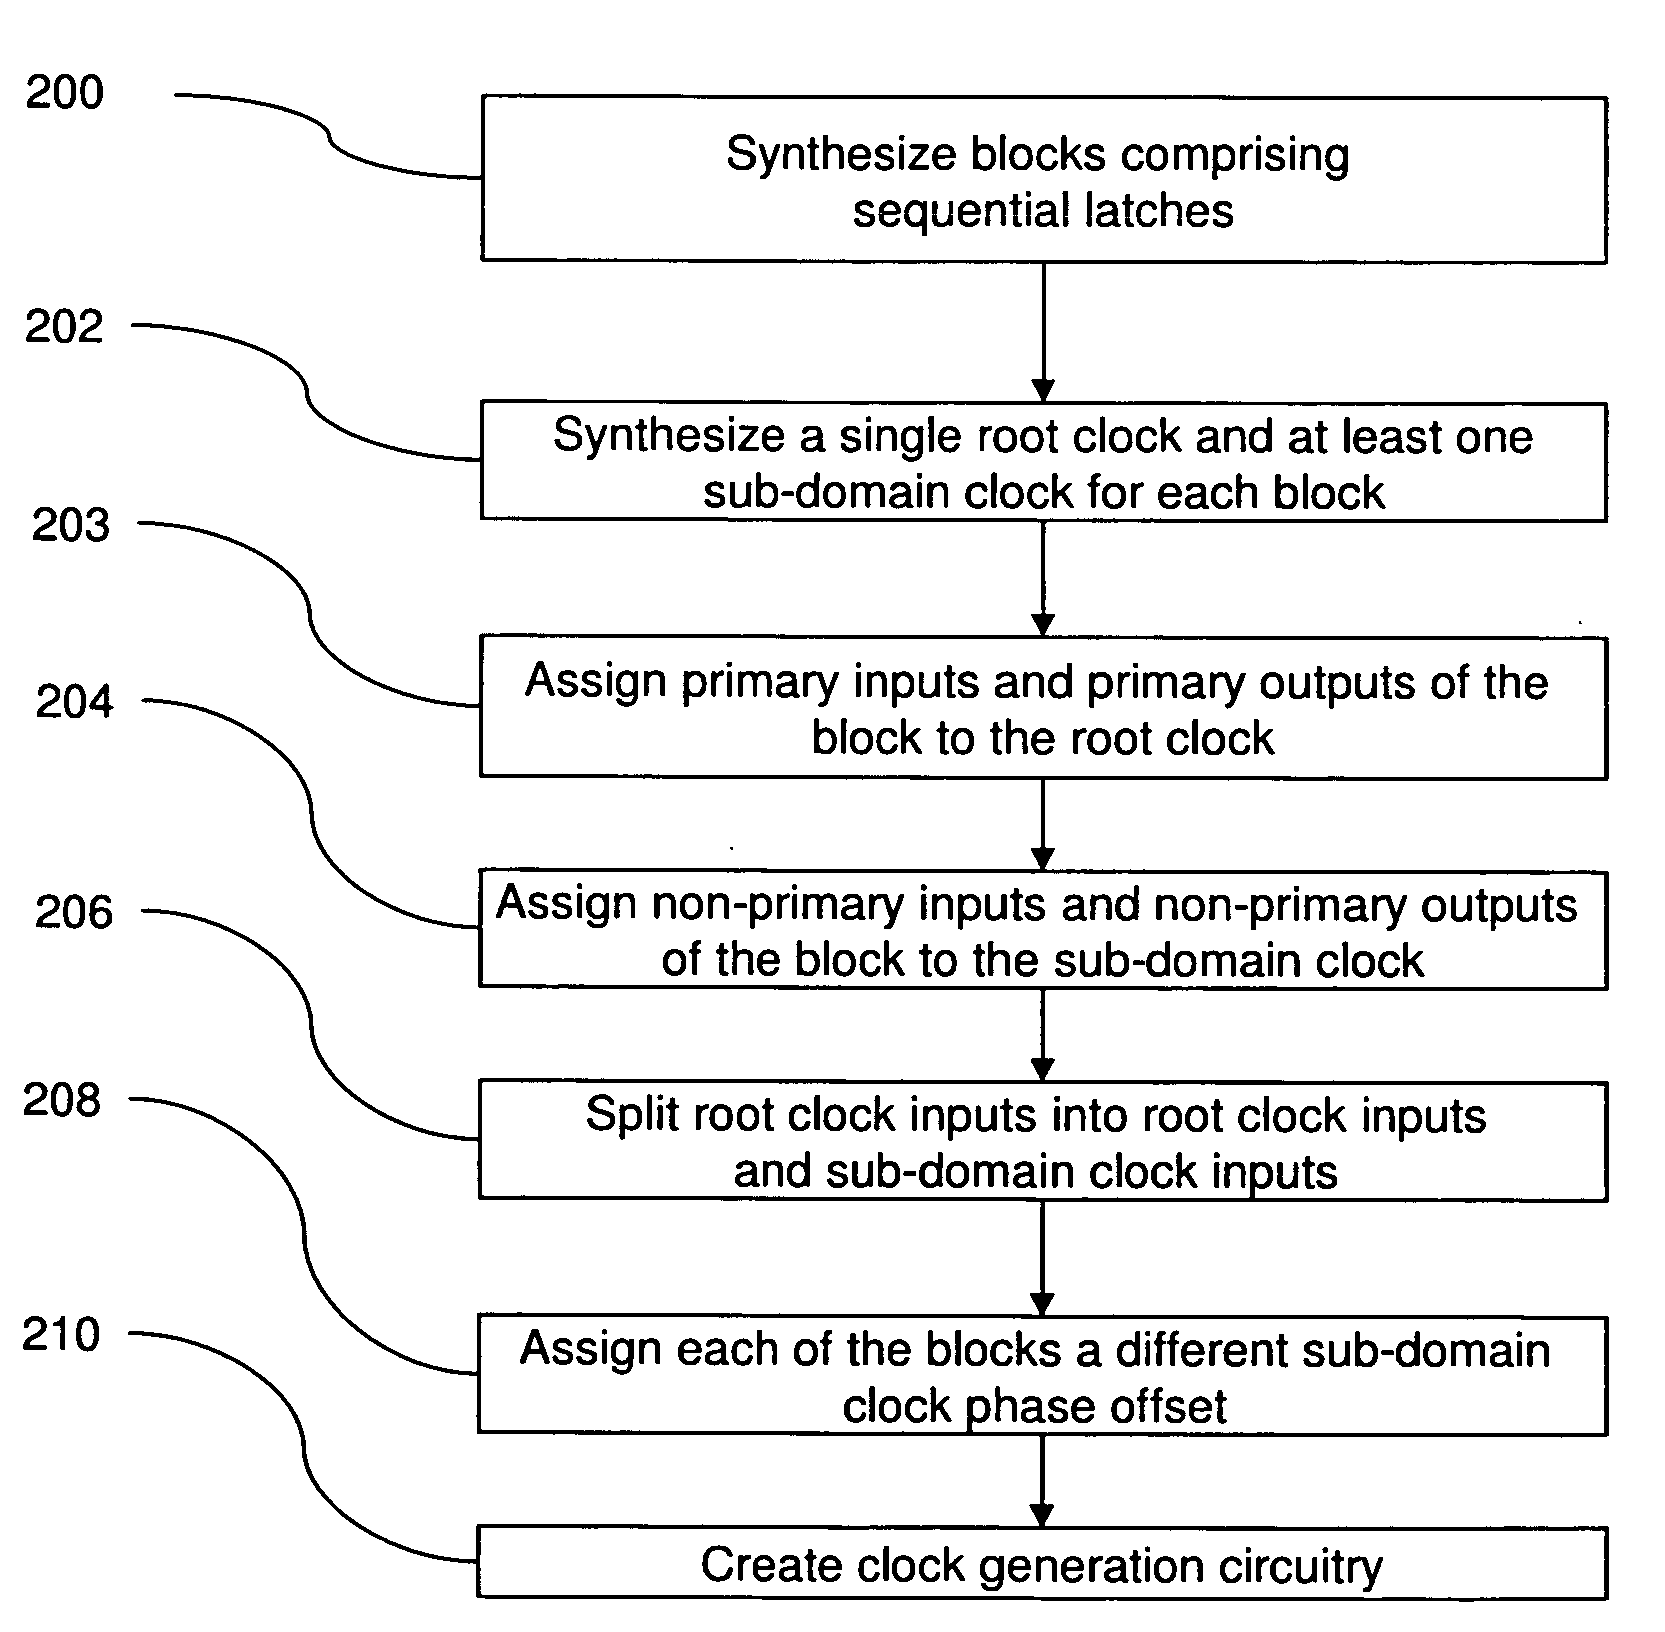 Transition Balancing For Noise Reduction/Di/Dt Reduction During Design, Synthesis, and Physical Design